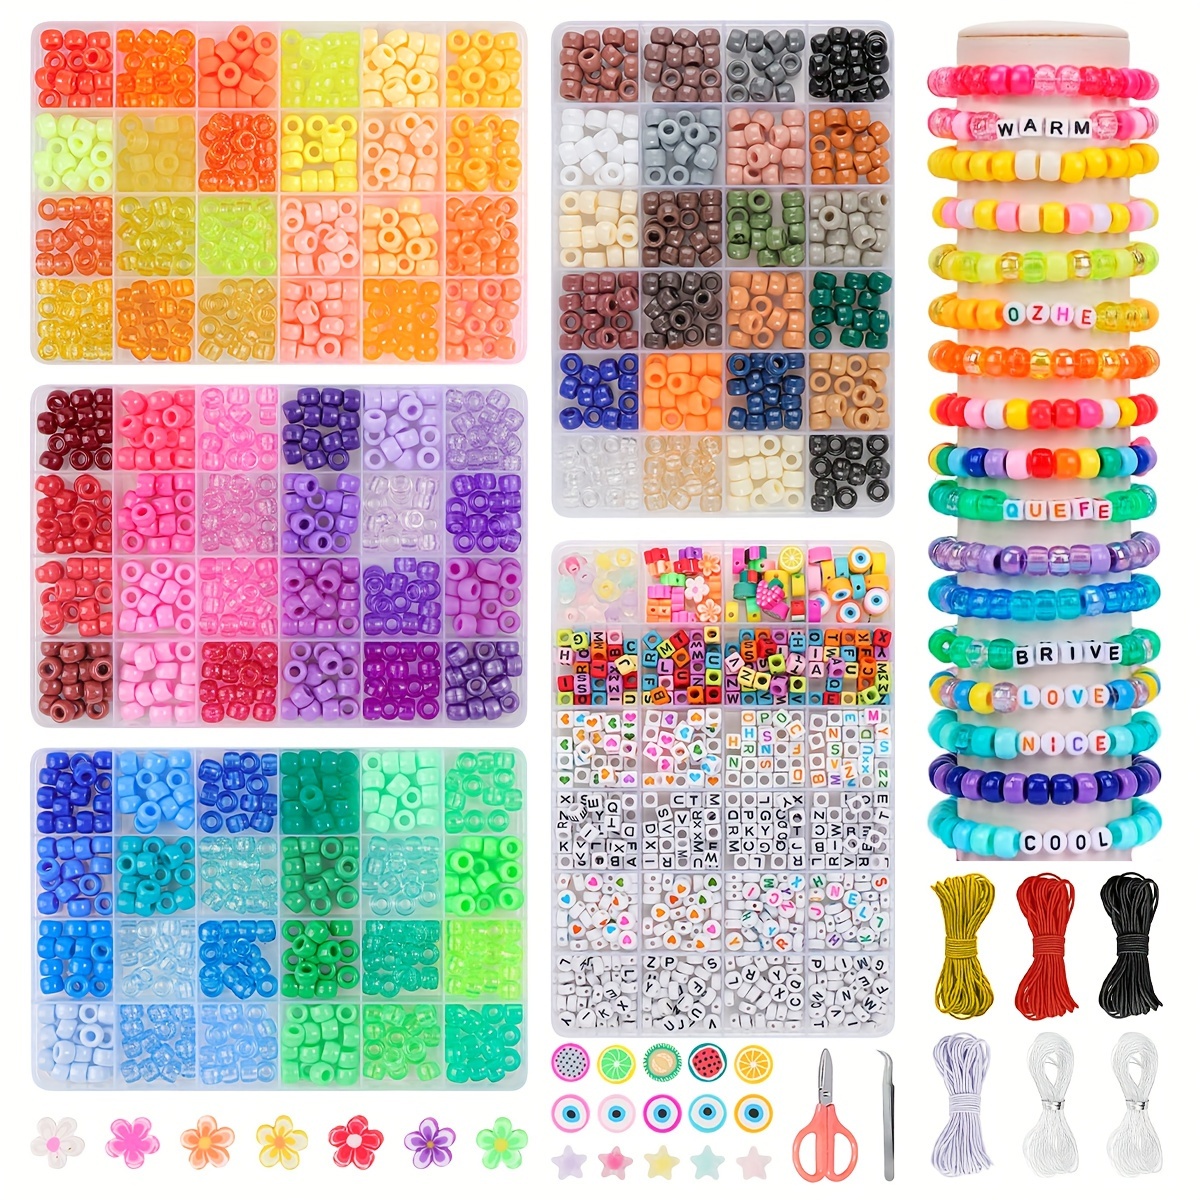 QUEFE 1000pcs 4 Color Acrylic Alphabet Letter Beads with 50 Meters Elastic Crystal String Cord for Jewelry Making DIY Necklace Bracelet?6mm?